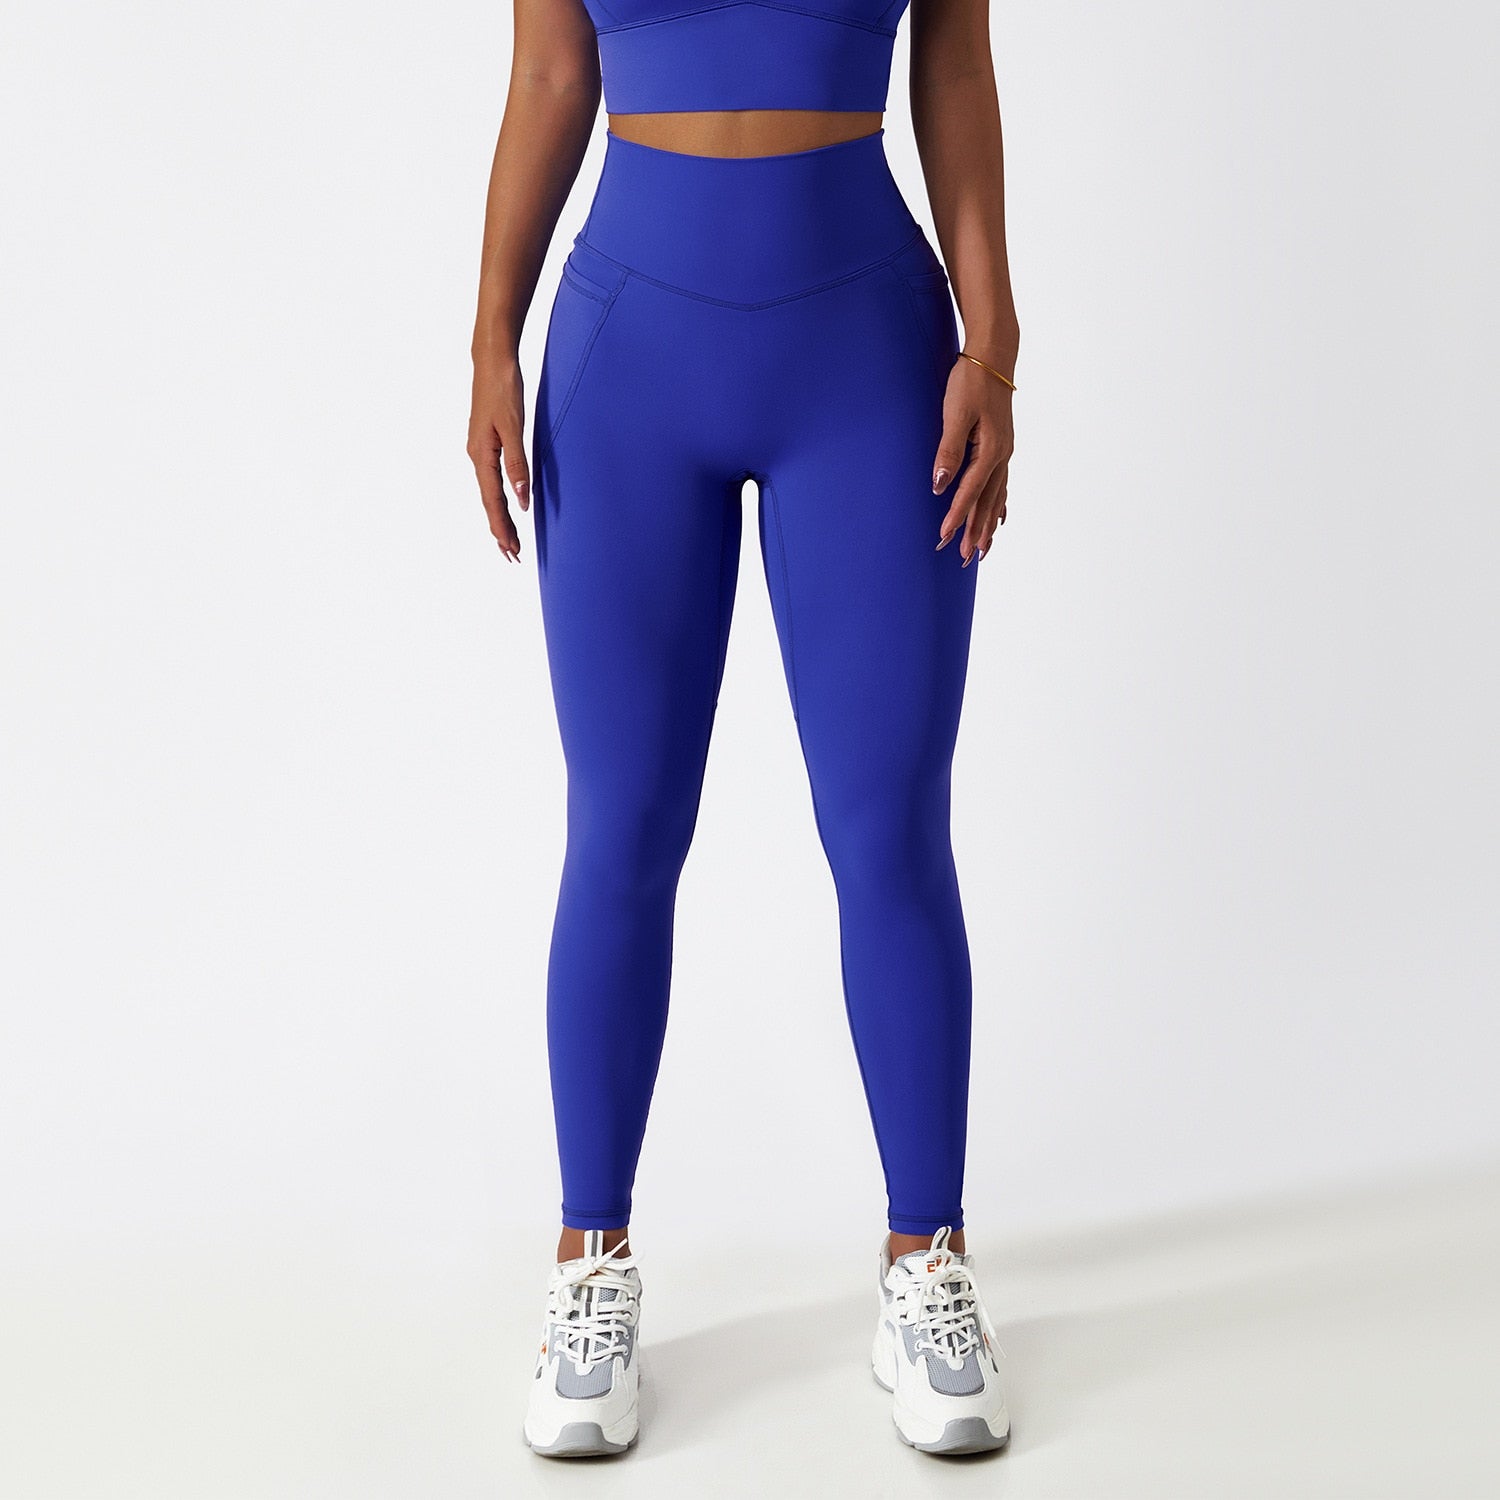 Women's Solid Seamless High Waisted Yoga Leggings With Pockets